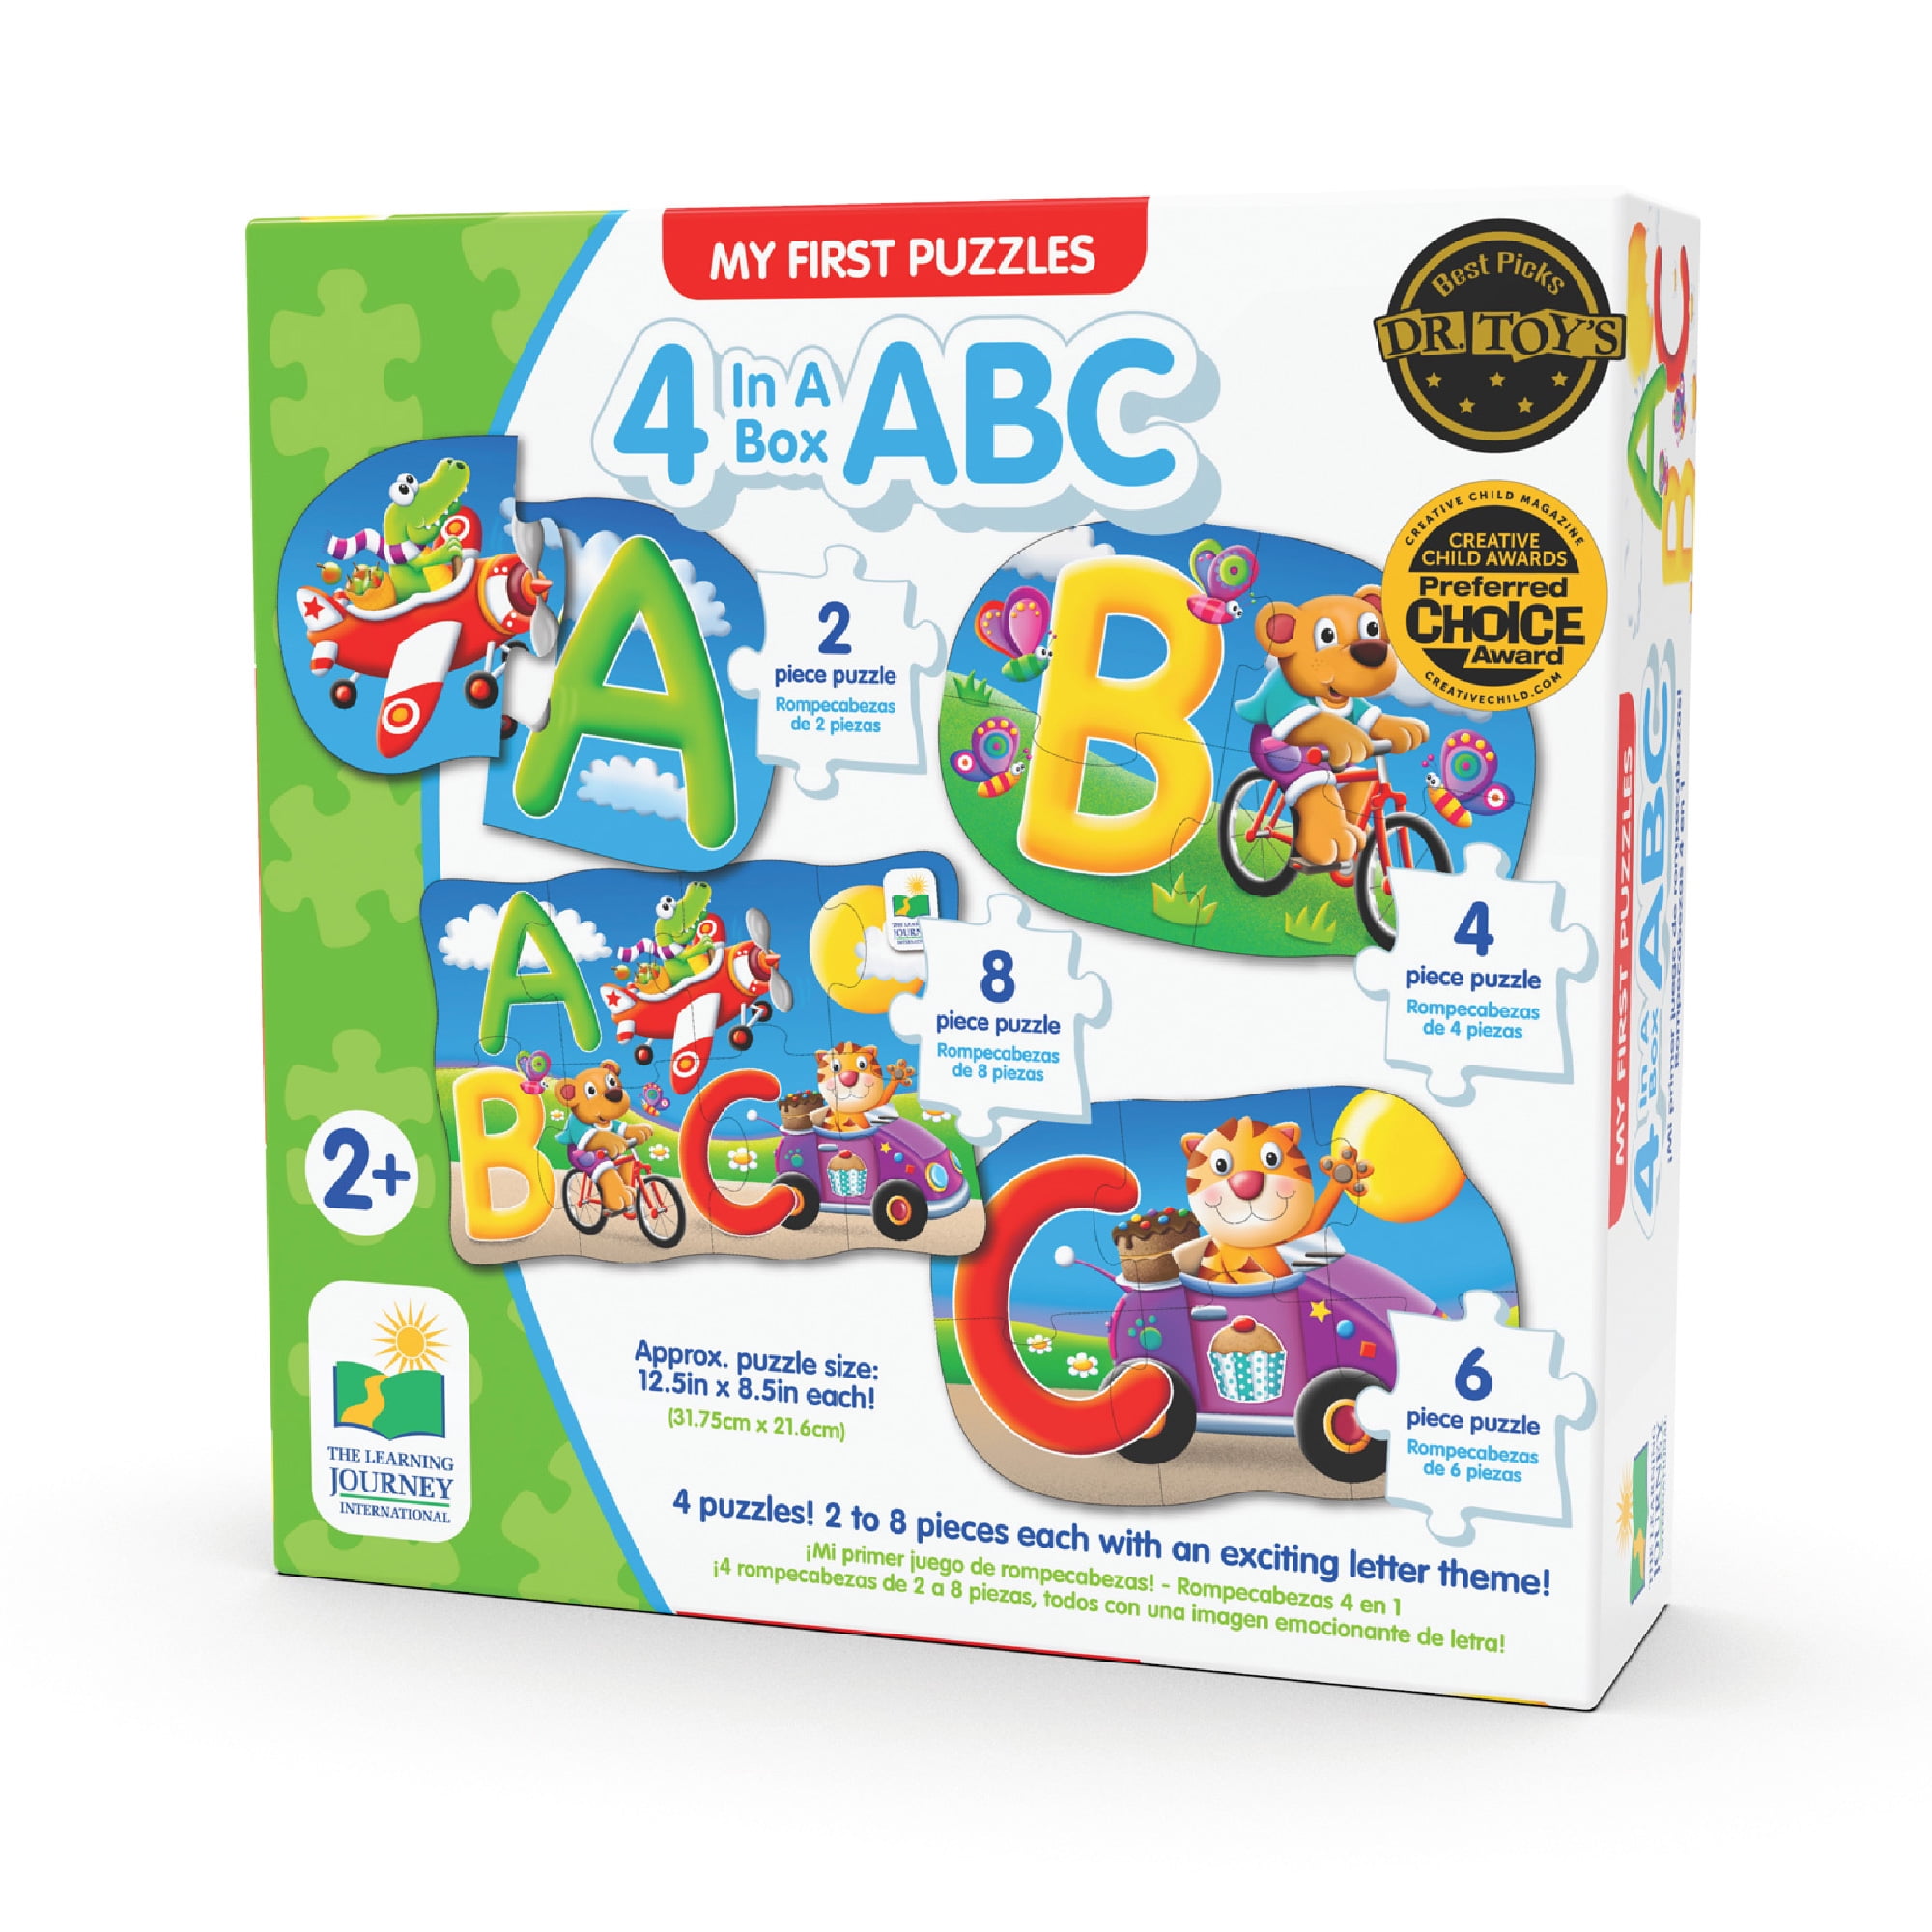 Award Winning Puzzle The Learning Journey My First 4-In-A-Box Puzzle STEM Educational Toddler Toys & Gifts for Boys & Girls Ages 2 and Up 123 